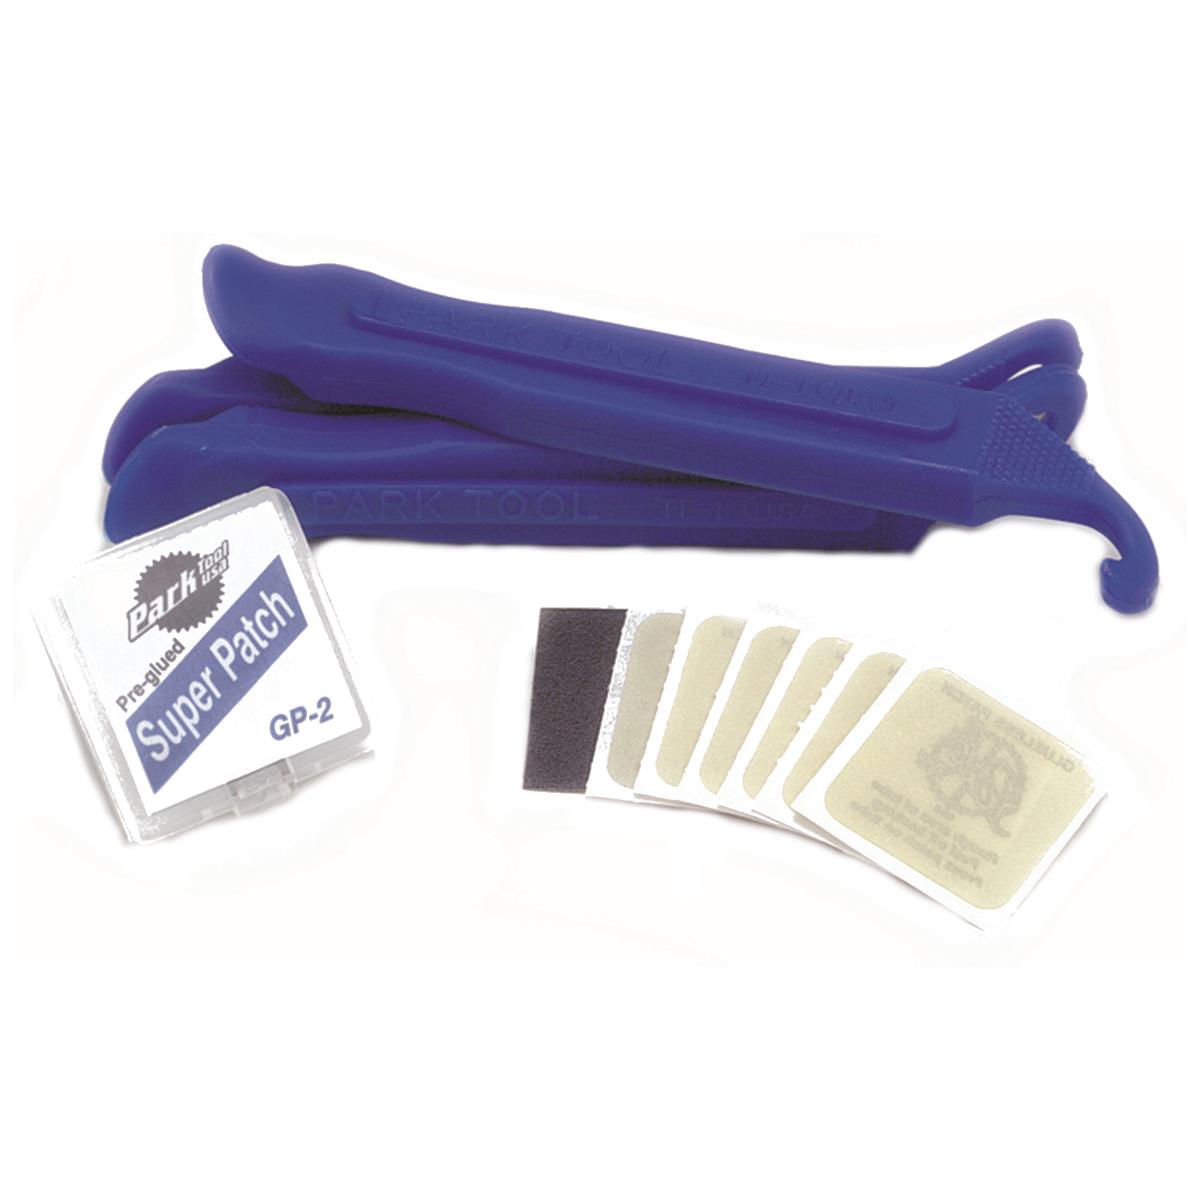 Park Tool Bike Tire Lever Set TR-1 Blue, with self-adhesive Patches